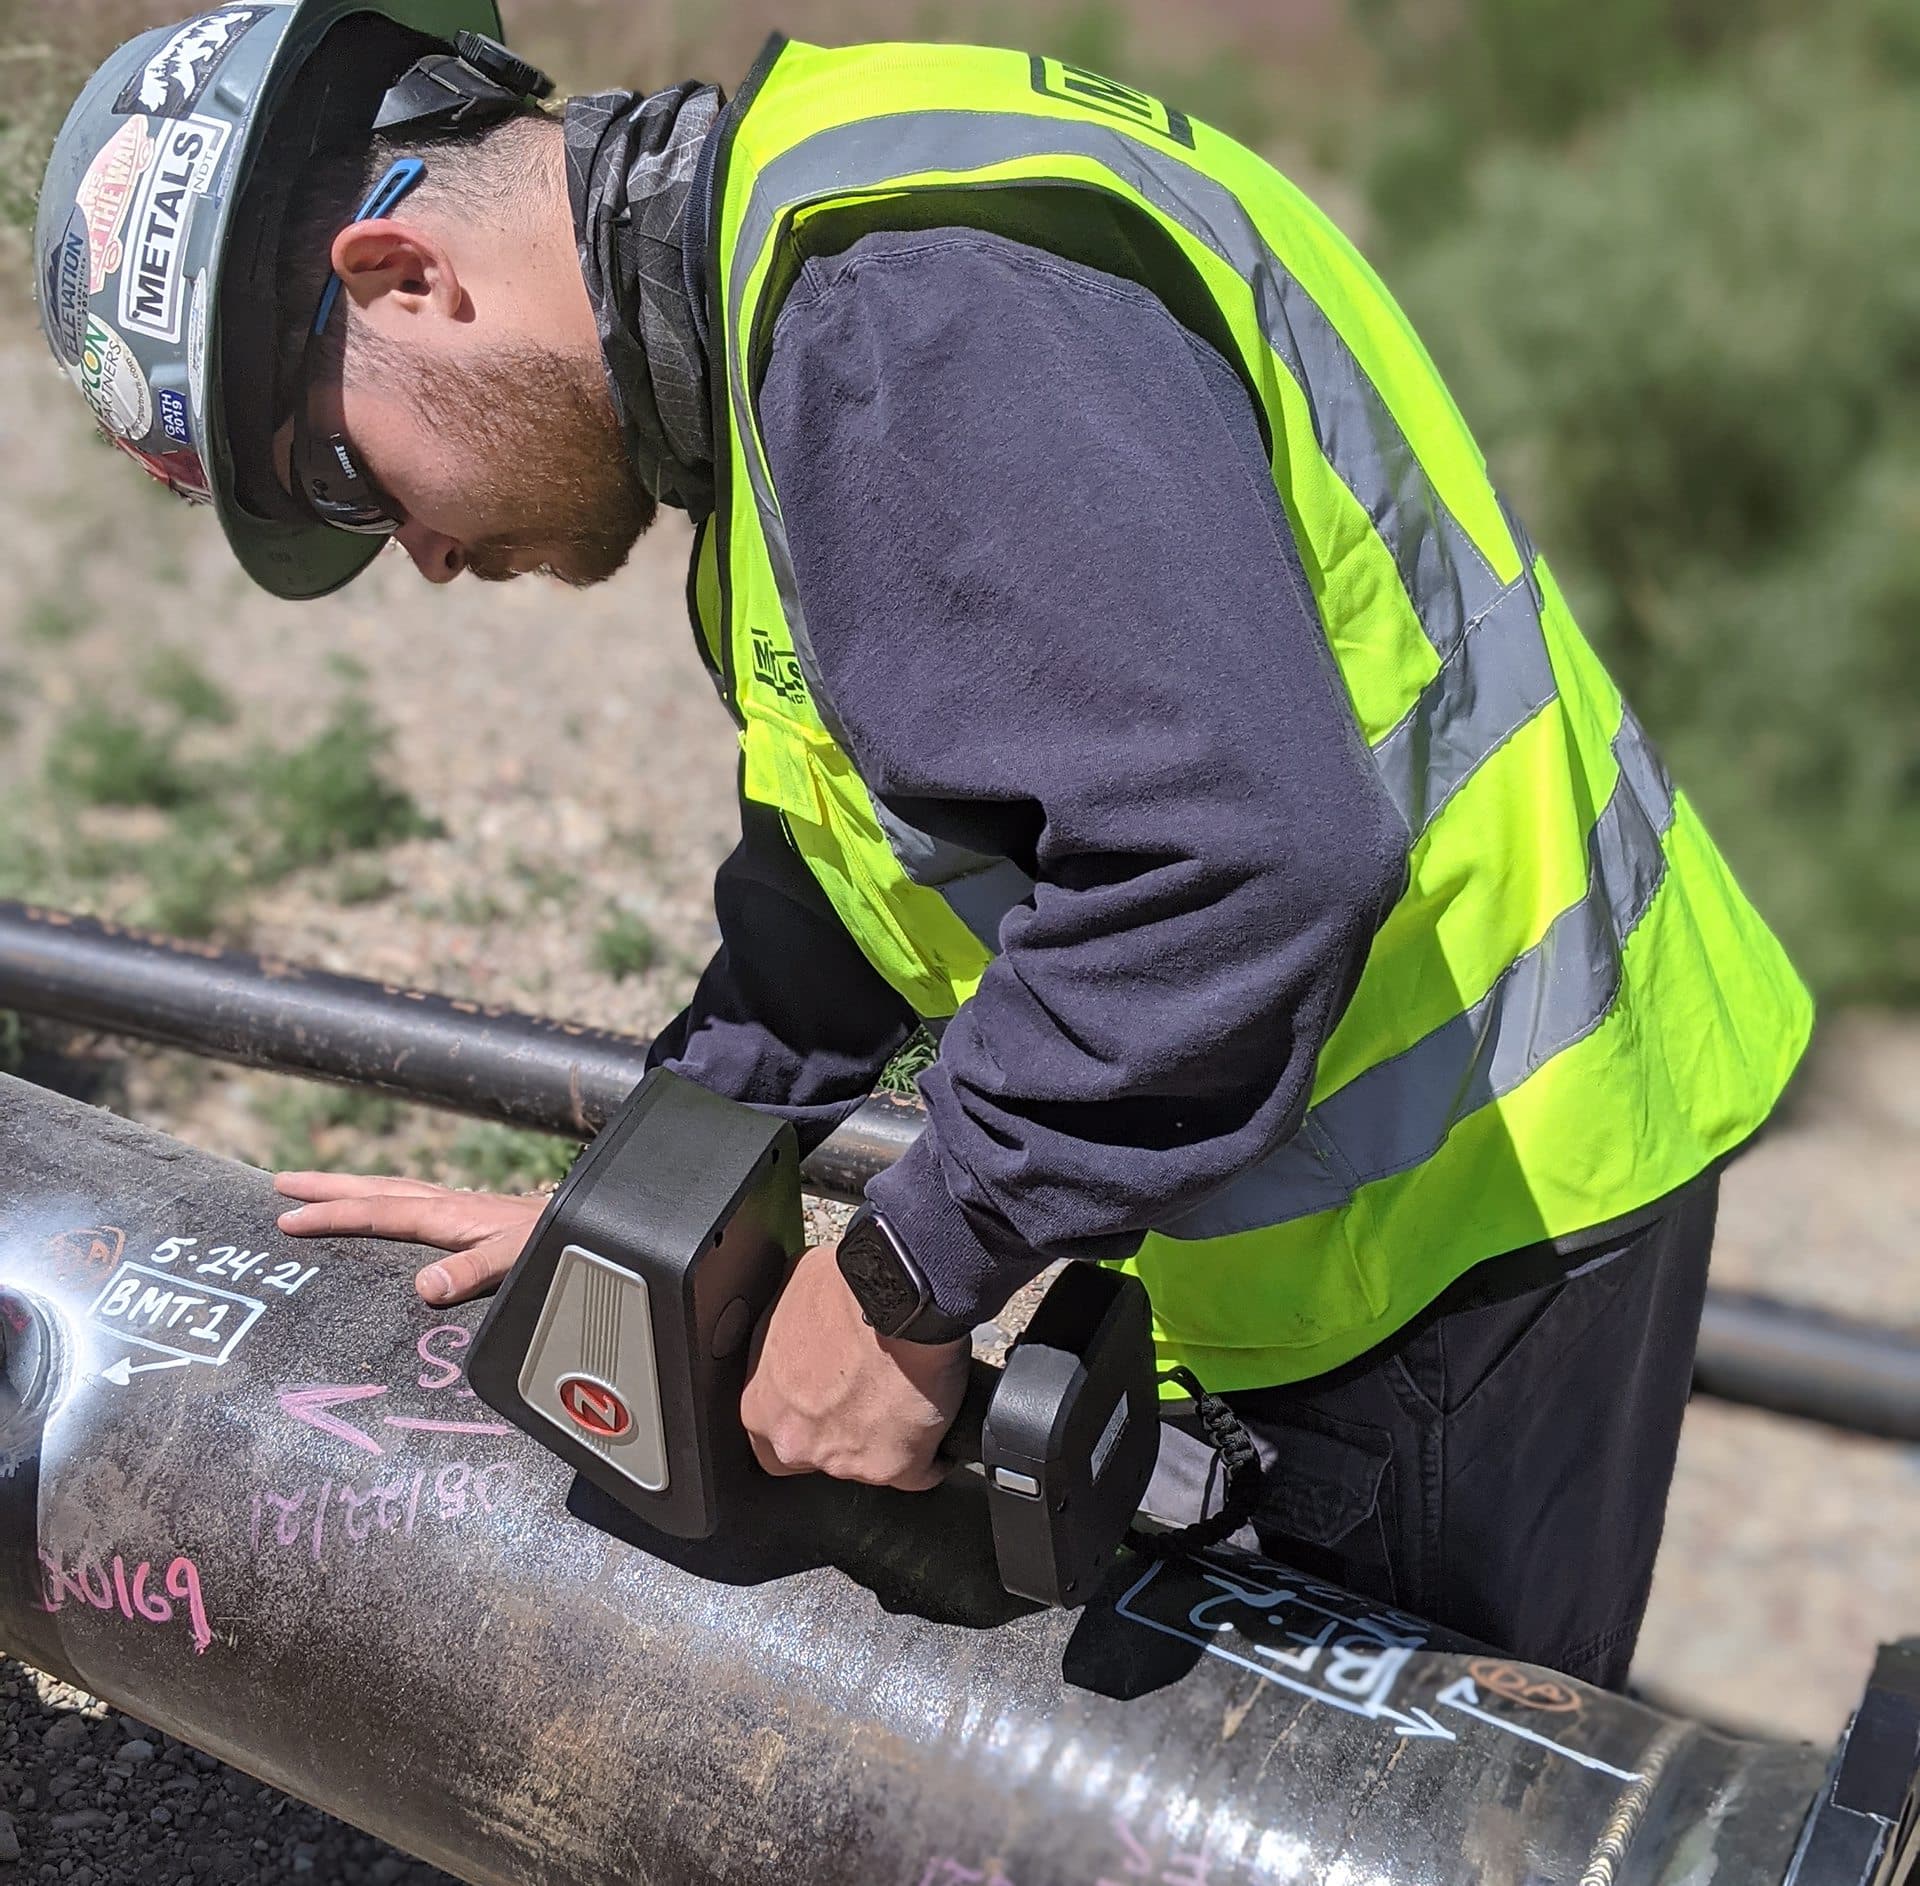 Technician performs Positive Material Identification (PMI) testing on pipeline